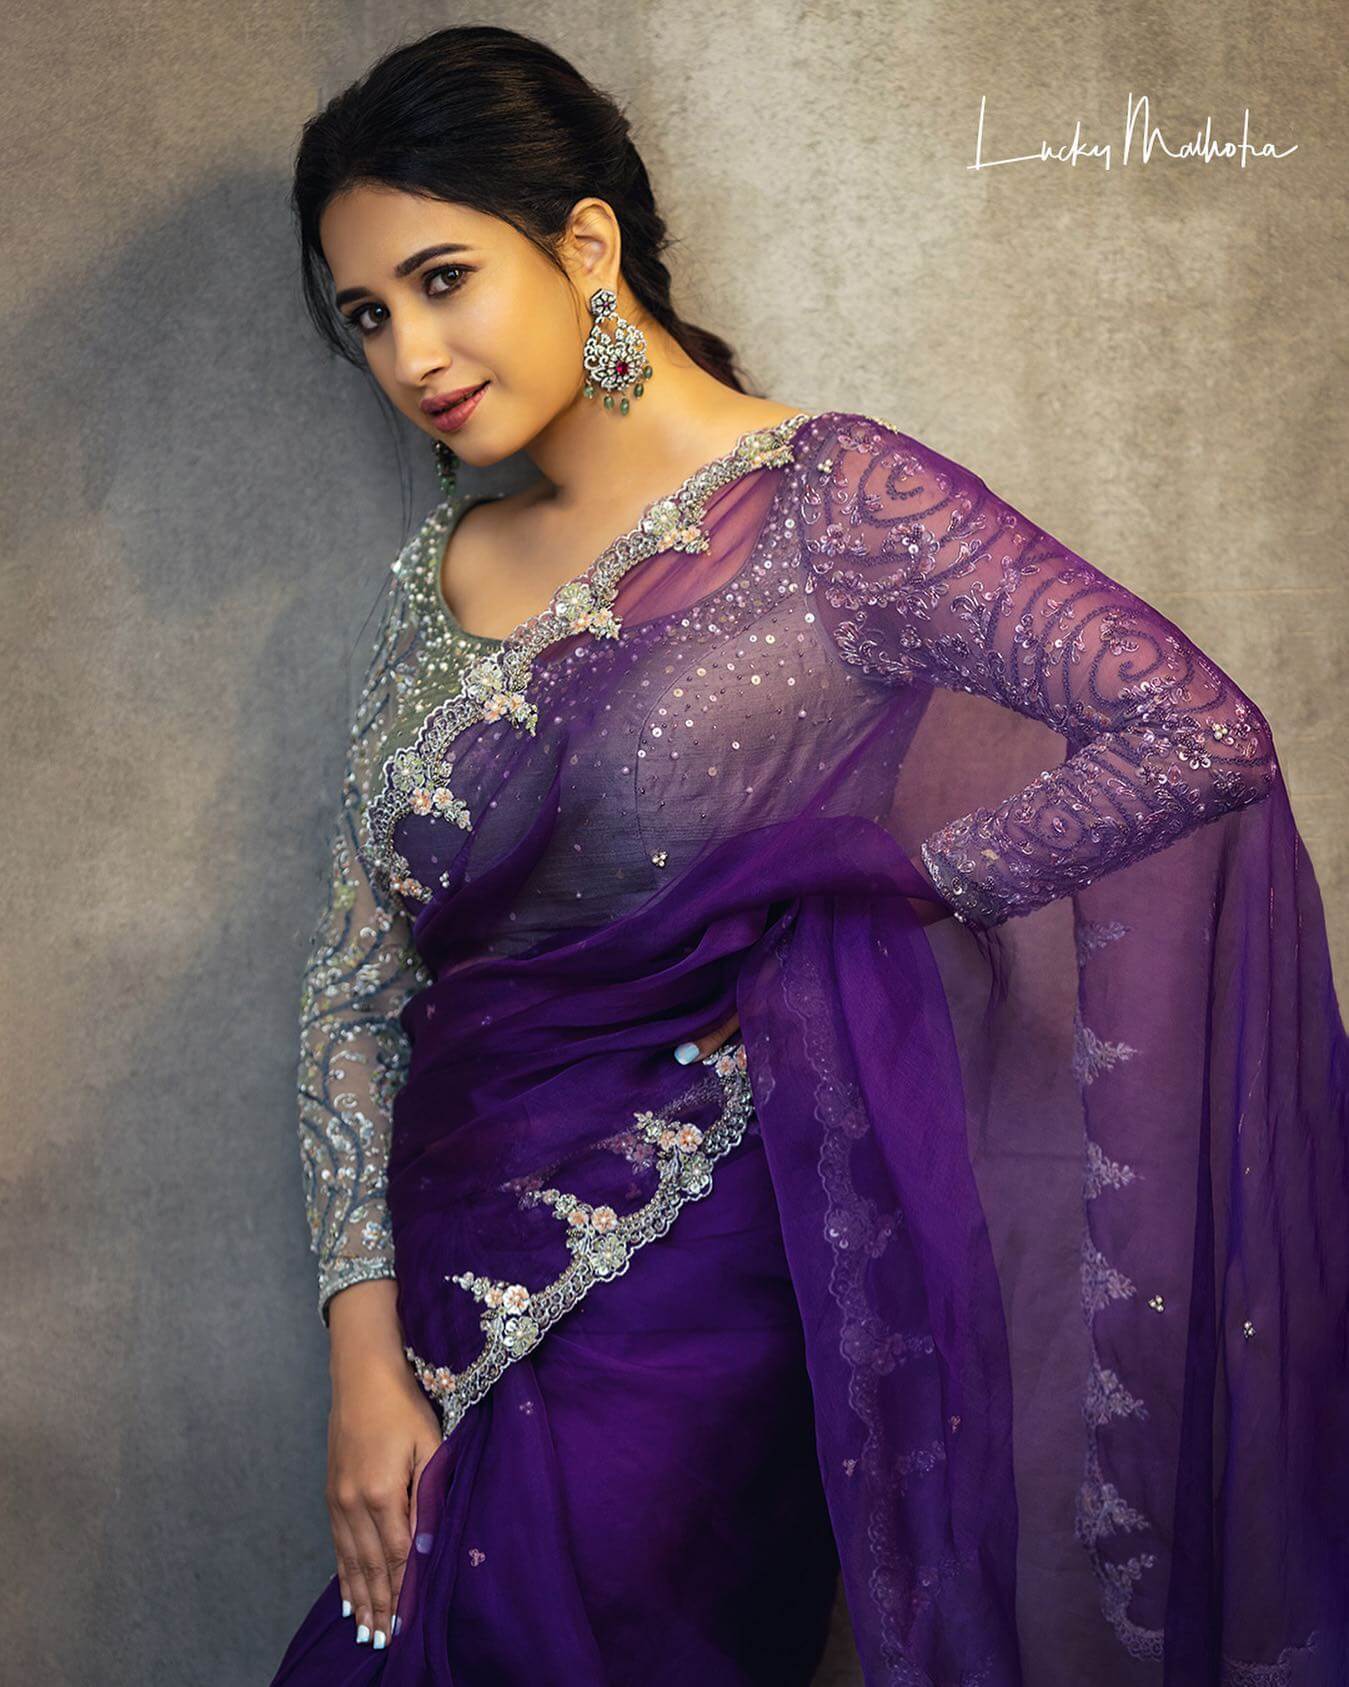 Manvitha Kamath Elegant Look In Purple Gerogette Stone Embedded Saree Paired With Full Sleeves Blouse